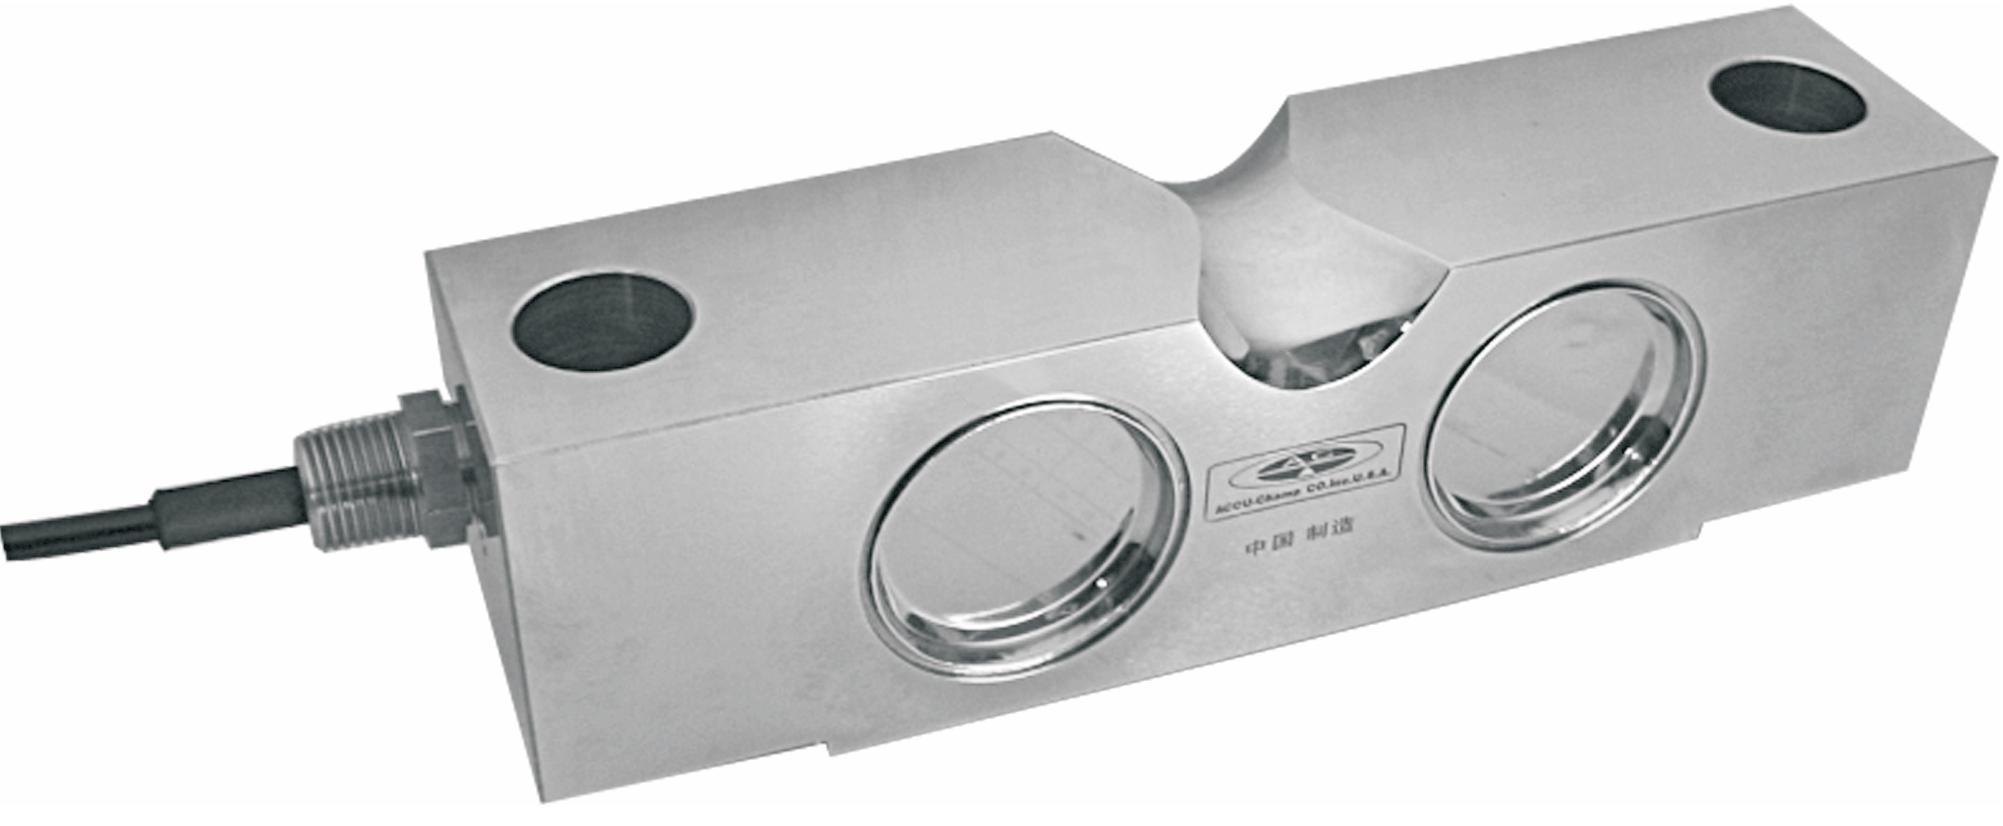 Bridge Load Cell for Scales (GF-4)